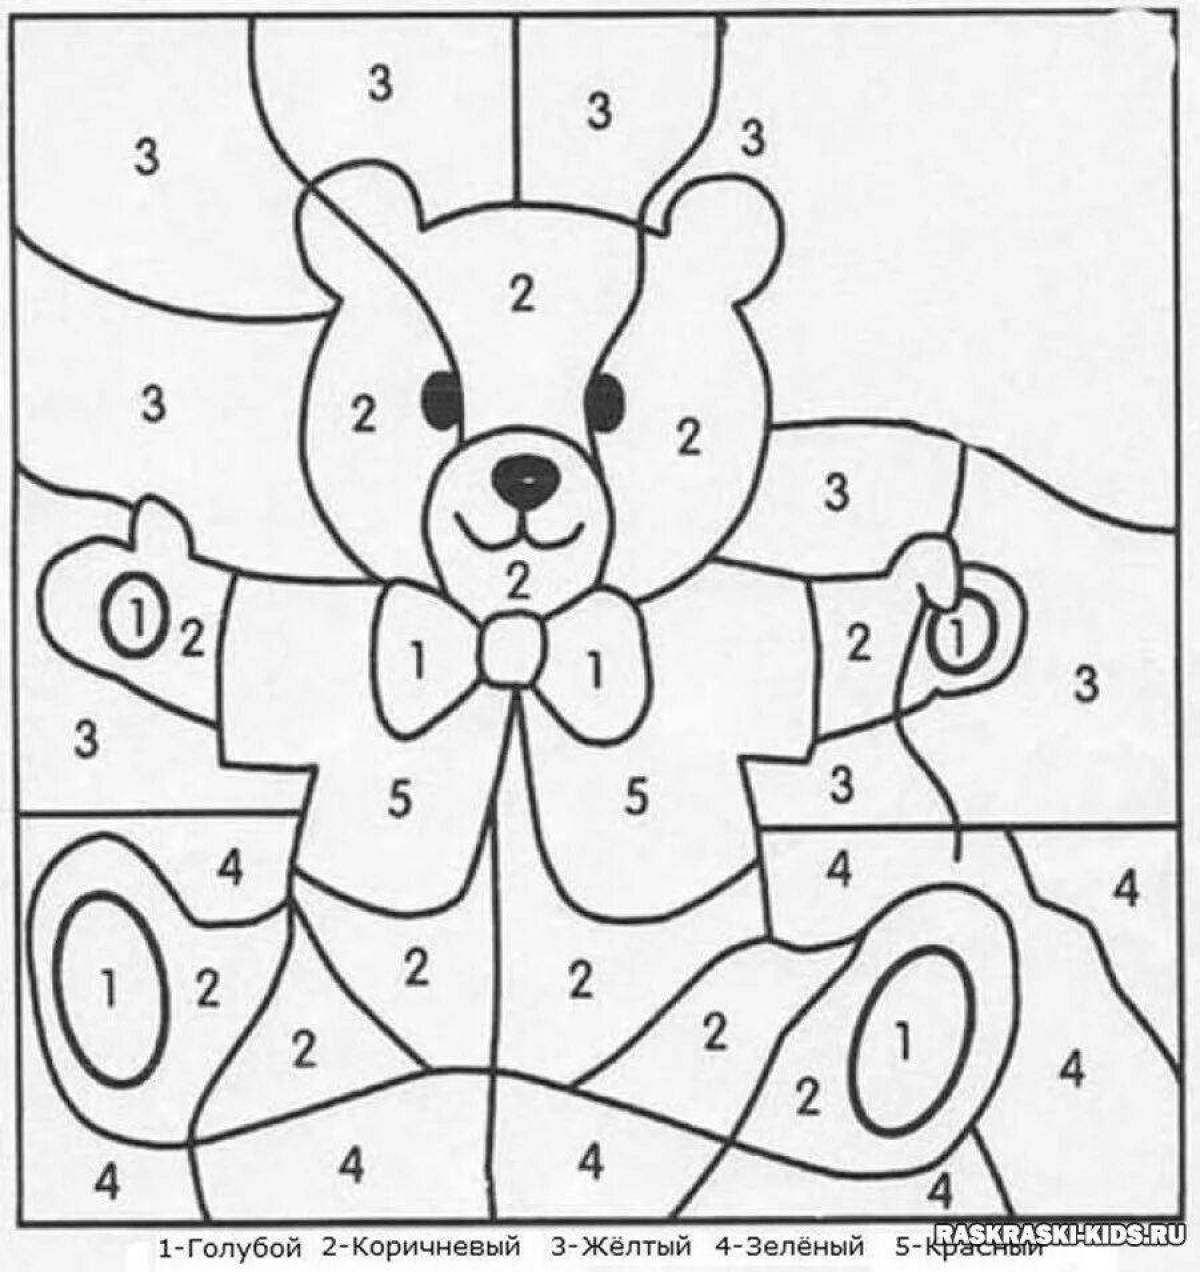 Exciting number coloring for kids